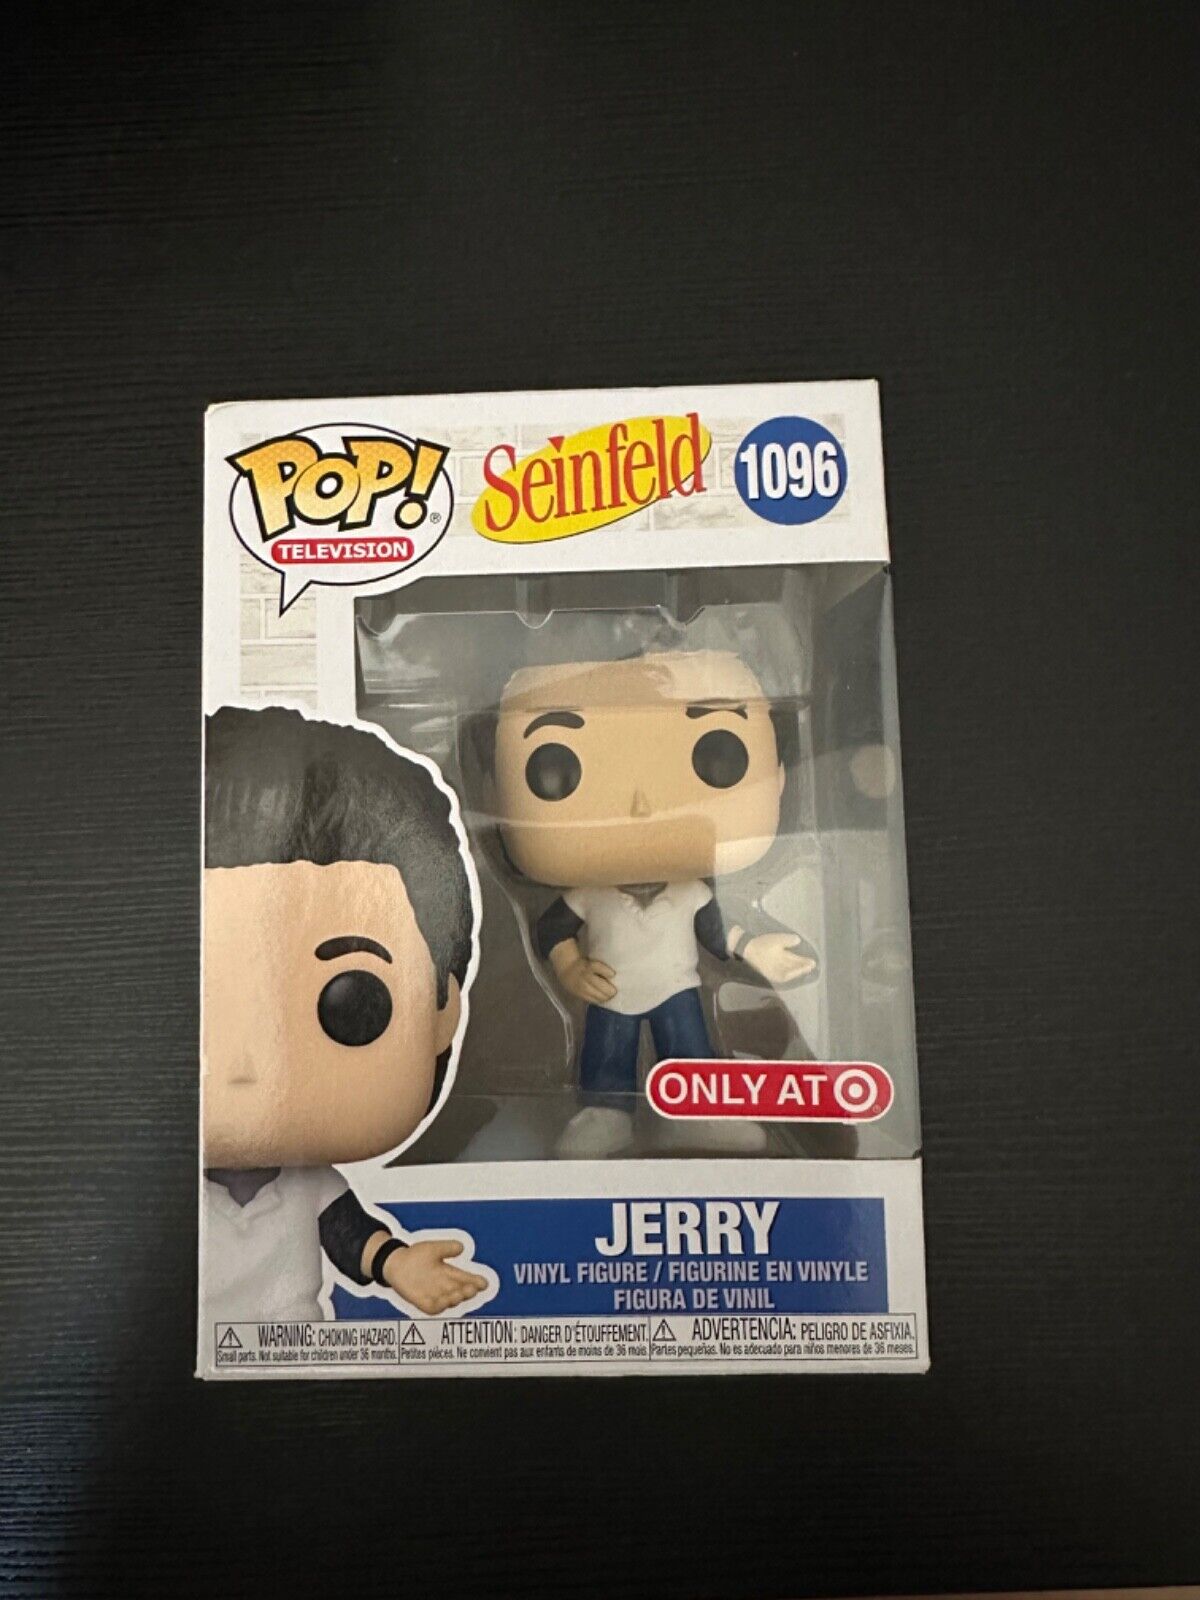 Funko POP Television Seinfeld #1096 Jerry Target Exclusive Figure BRAND NEW